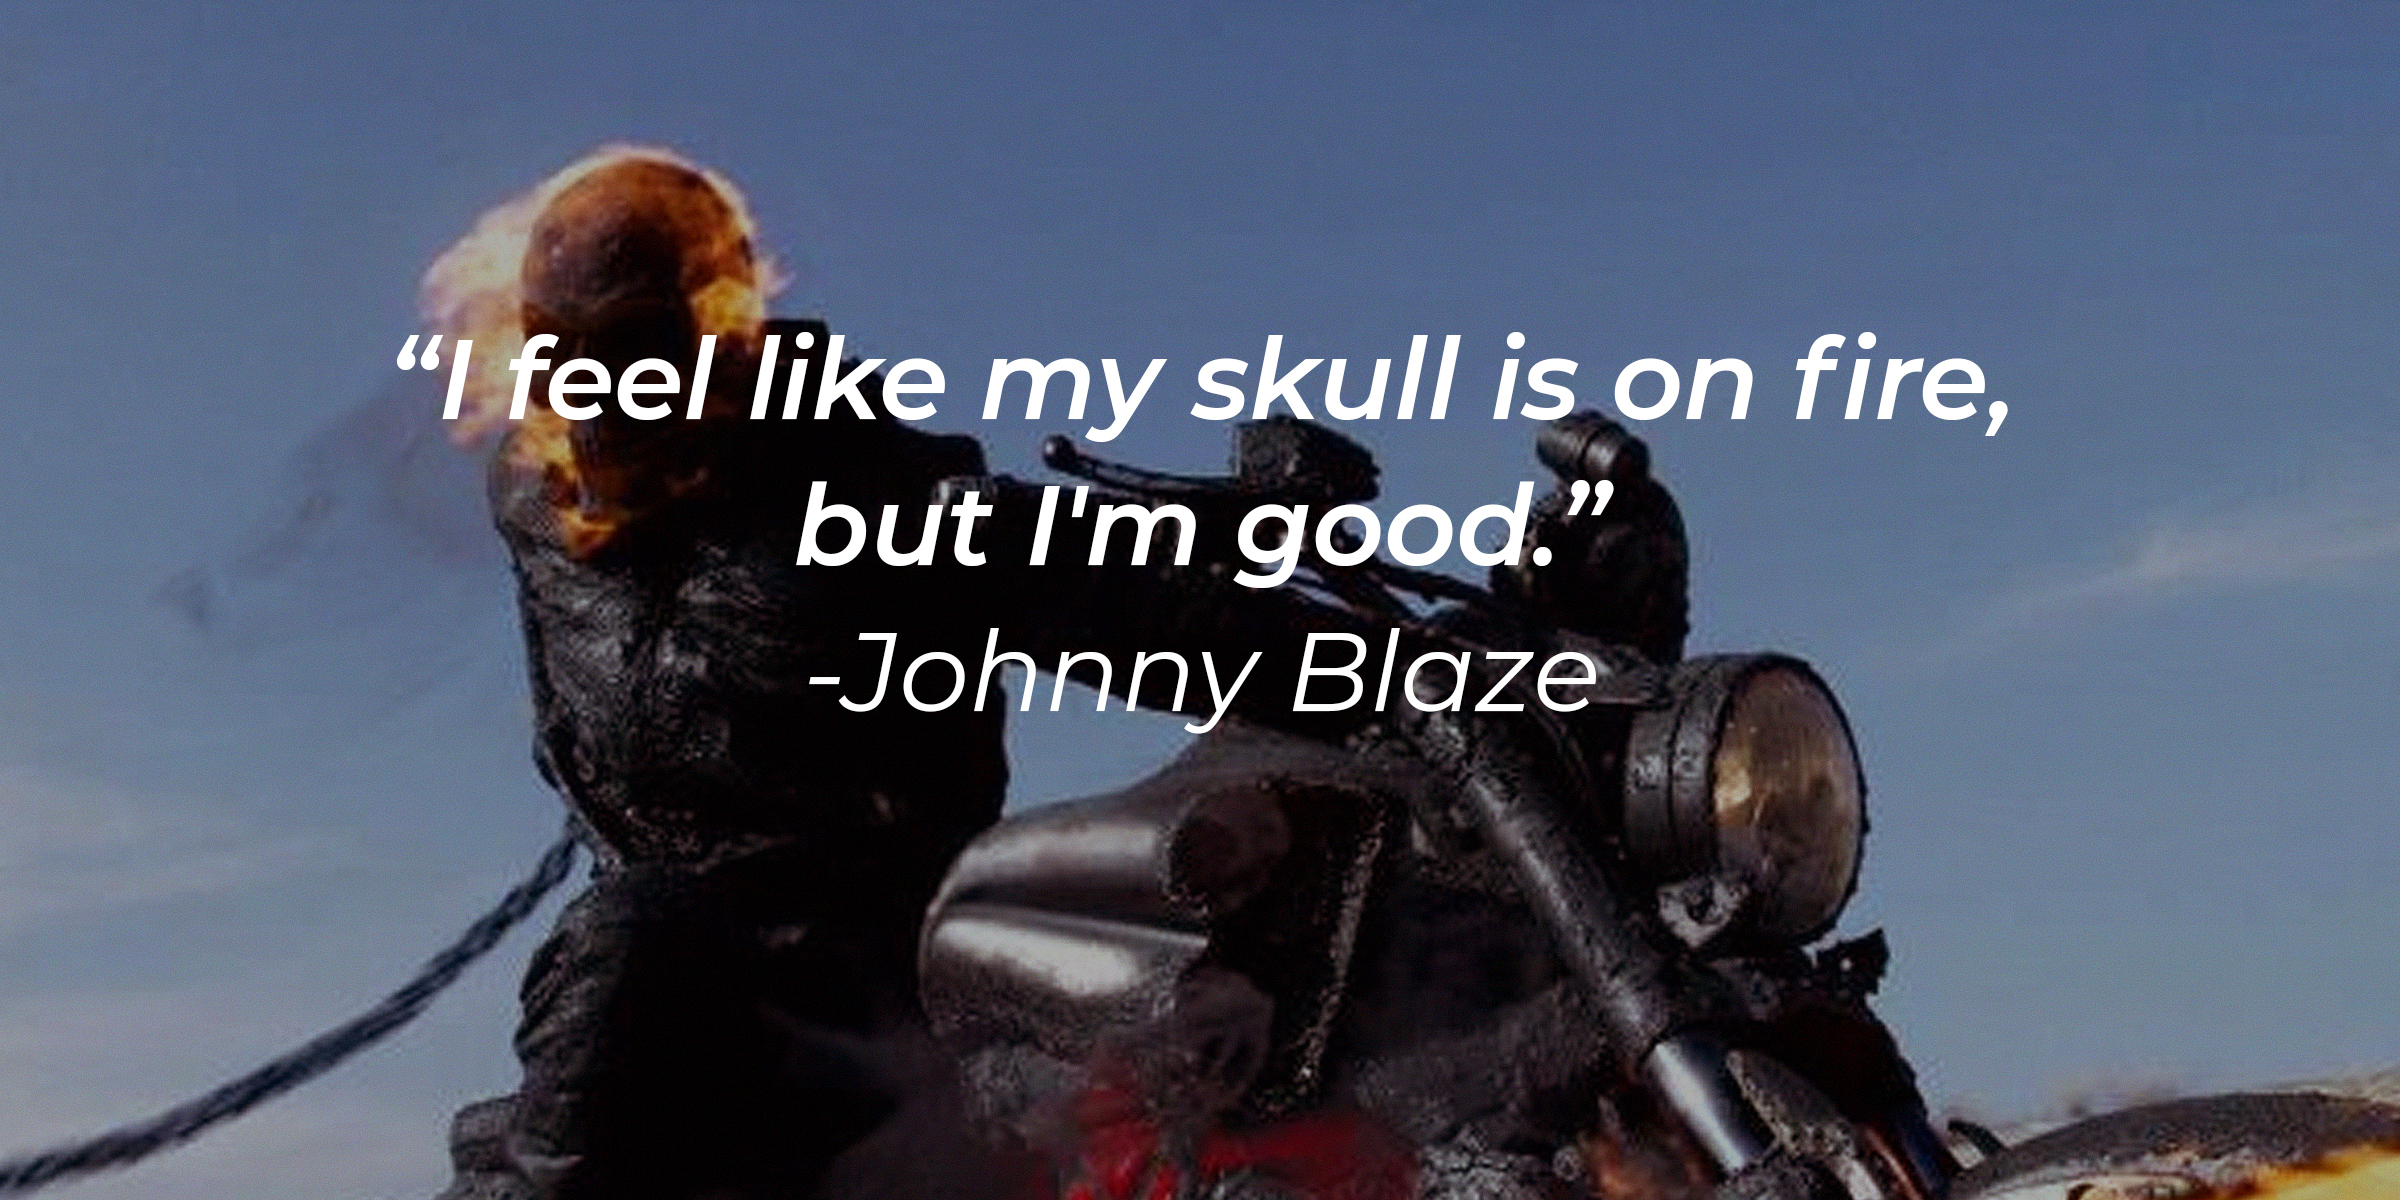 A photo of Ghost Rider with the quote: "I feel like my skull is on fire, but I'm good." | Source: facebook.com/ghostridermovie